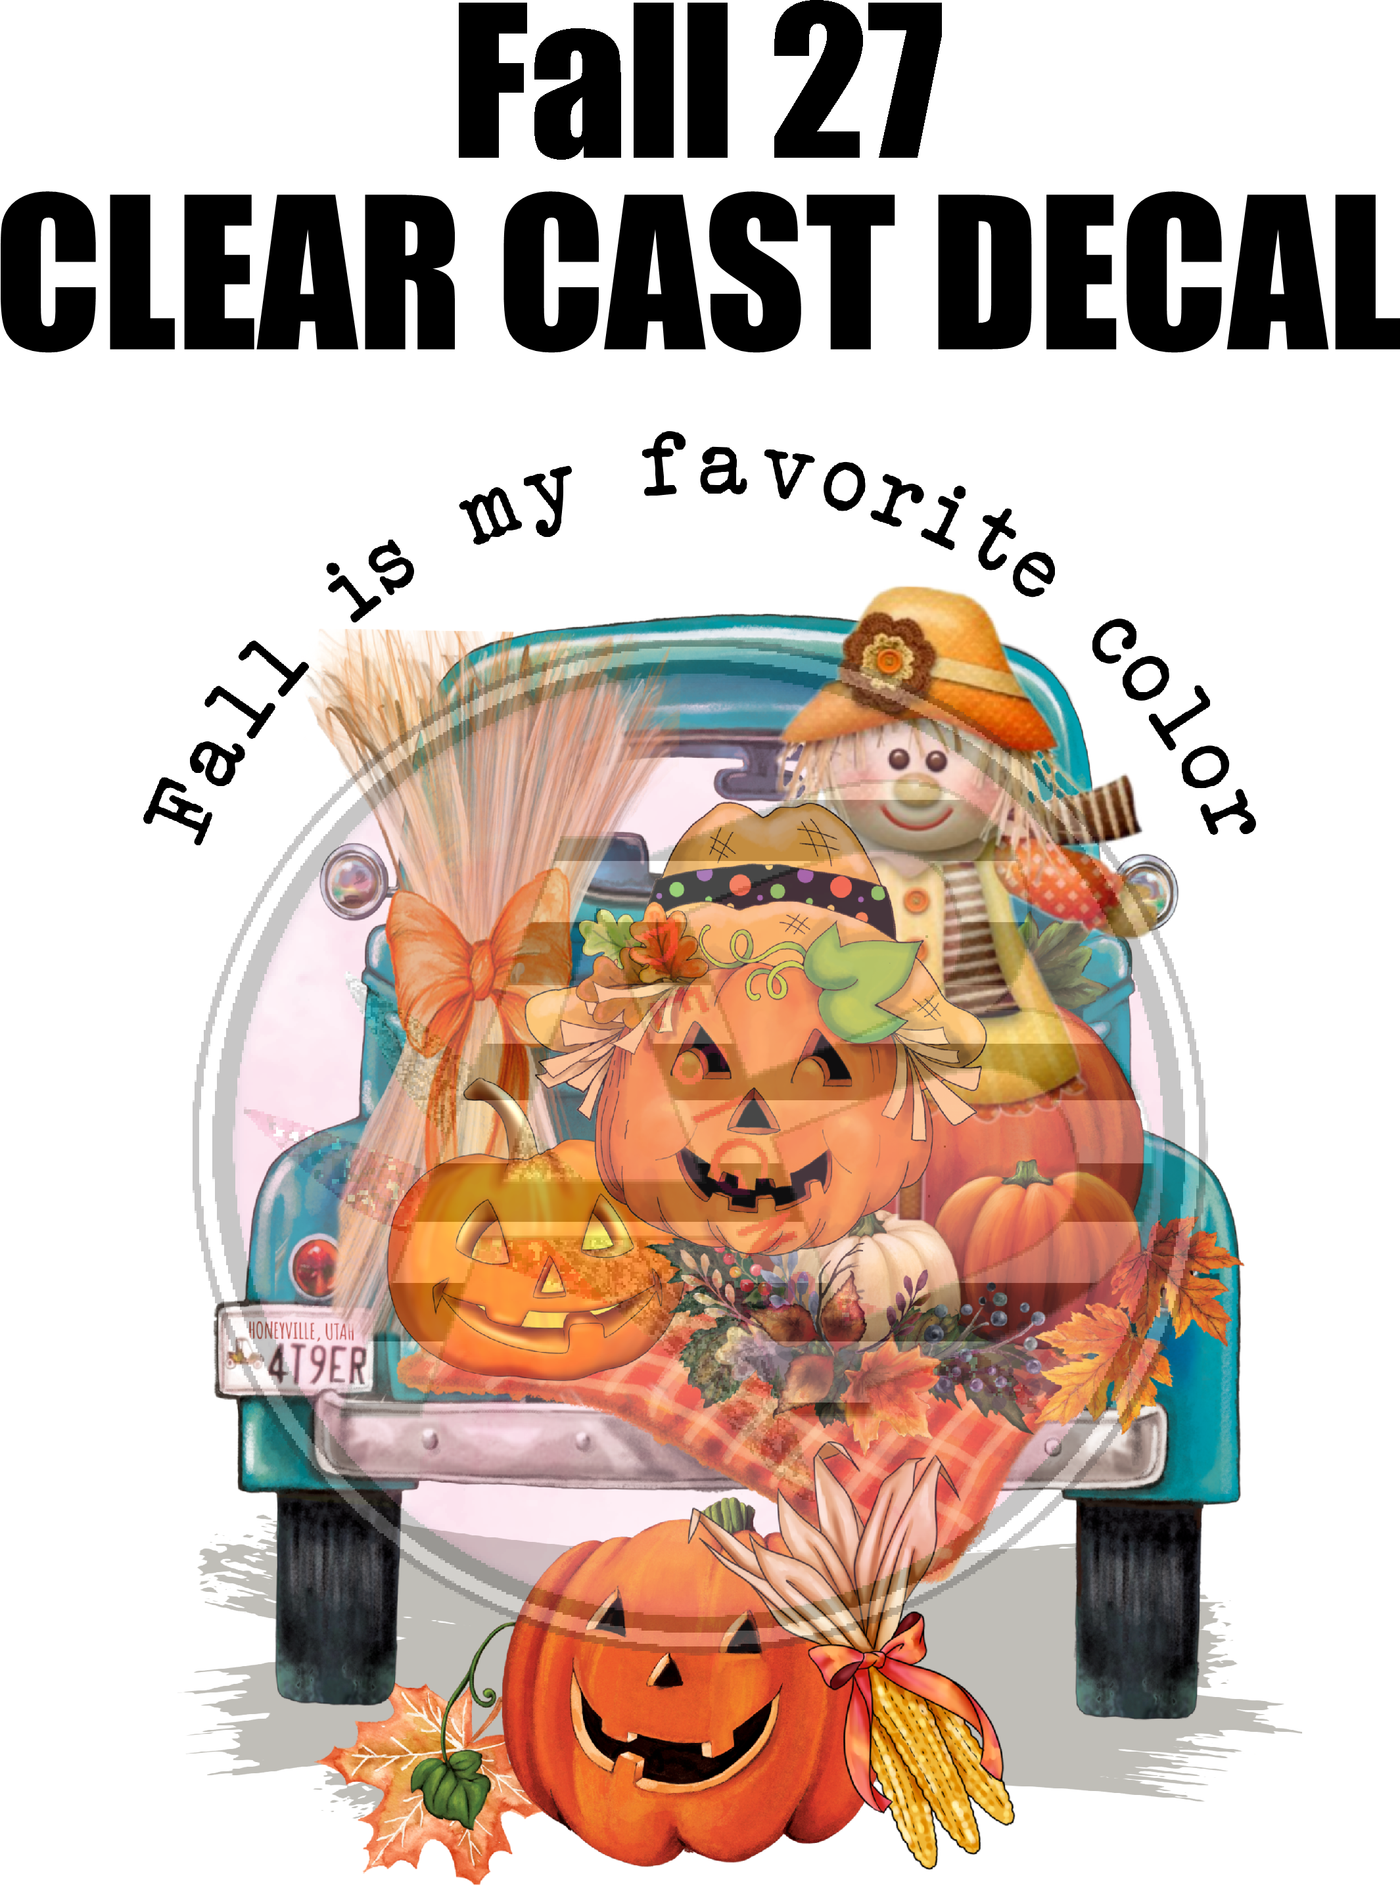 Fall 27 - Clear Cast Decal